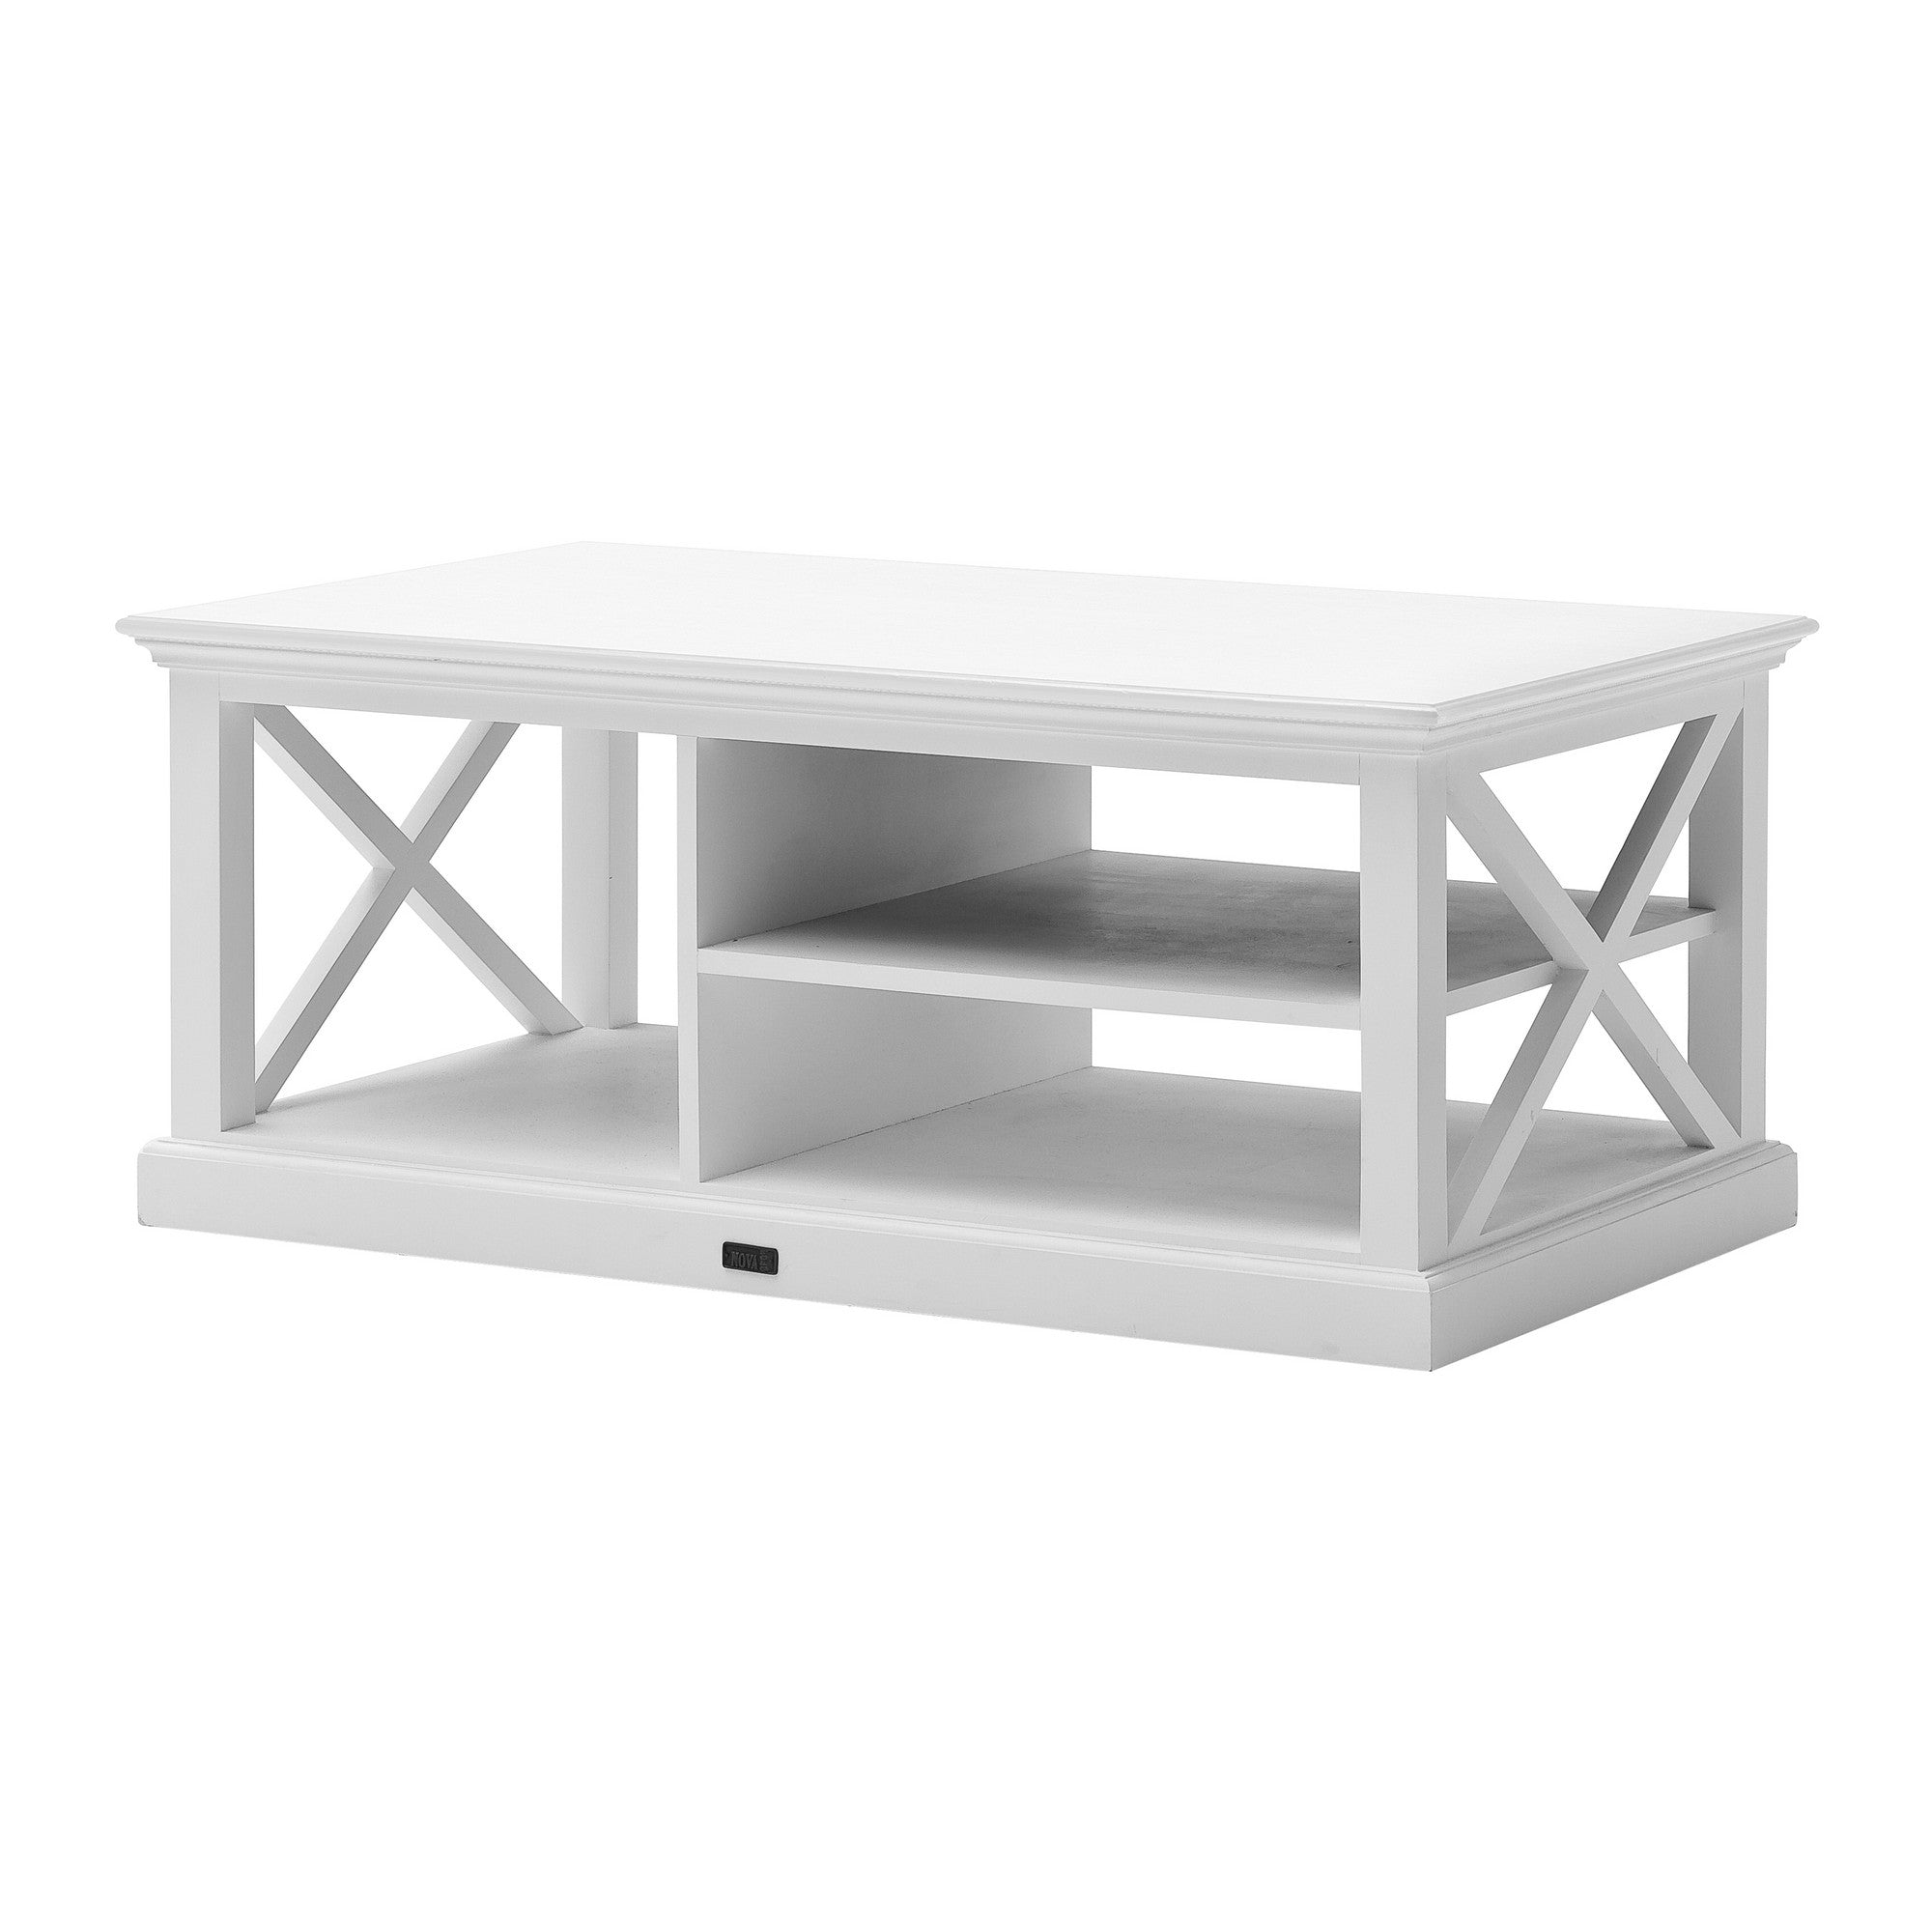 47" White Solid Wood And Solid And Manufactured Wood Coffee Table With Three Shelves